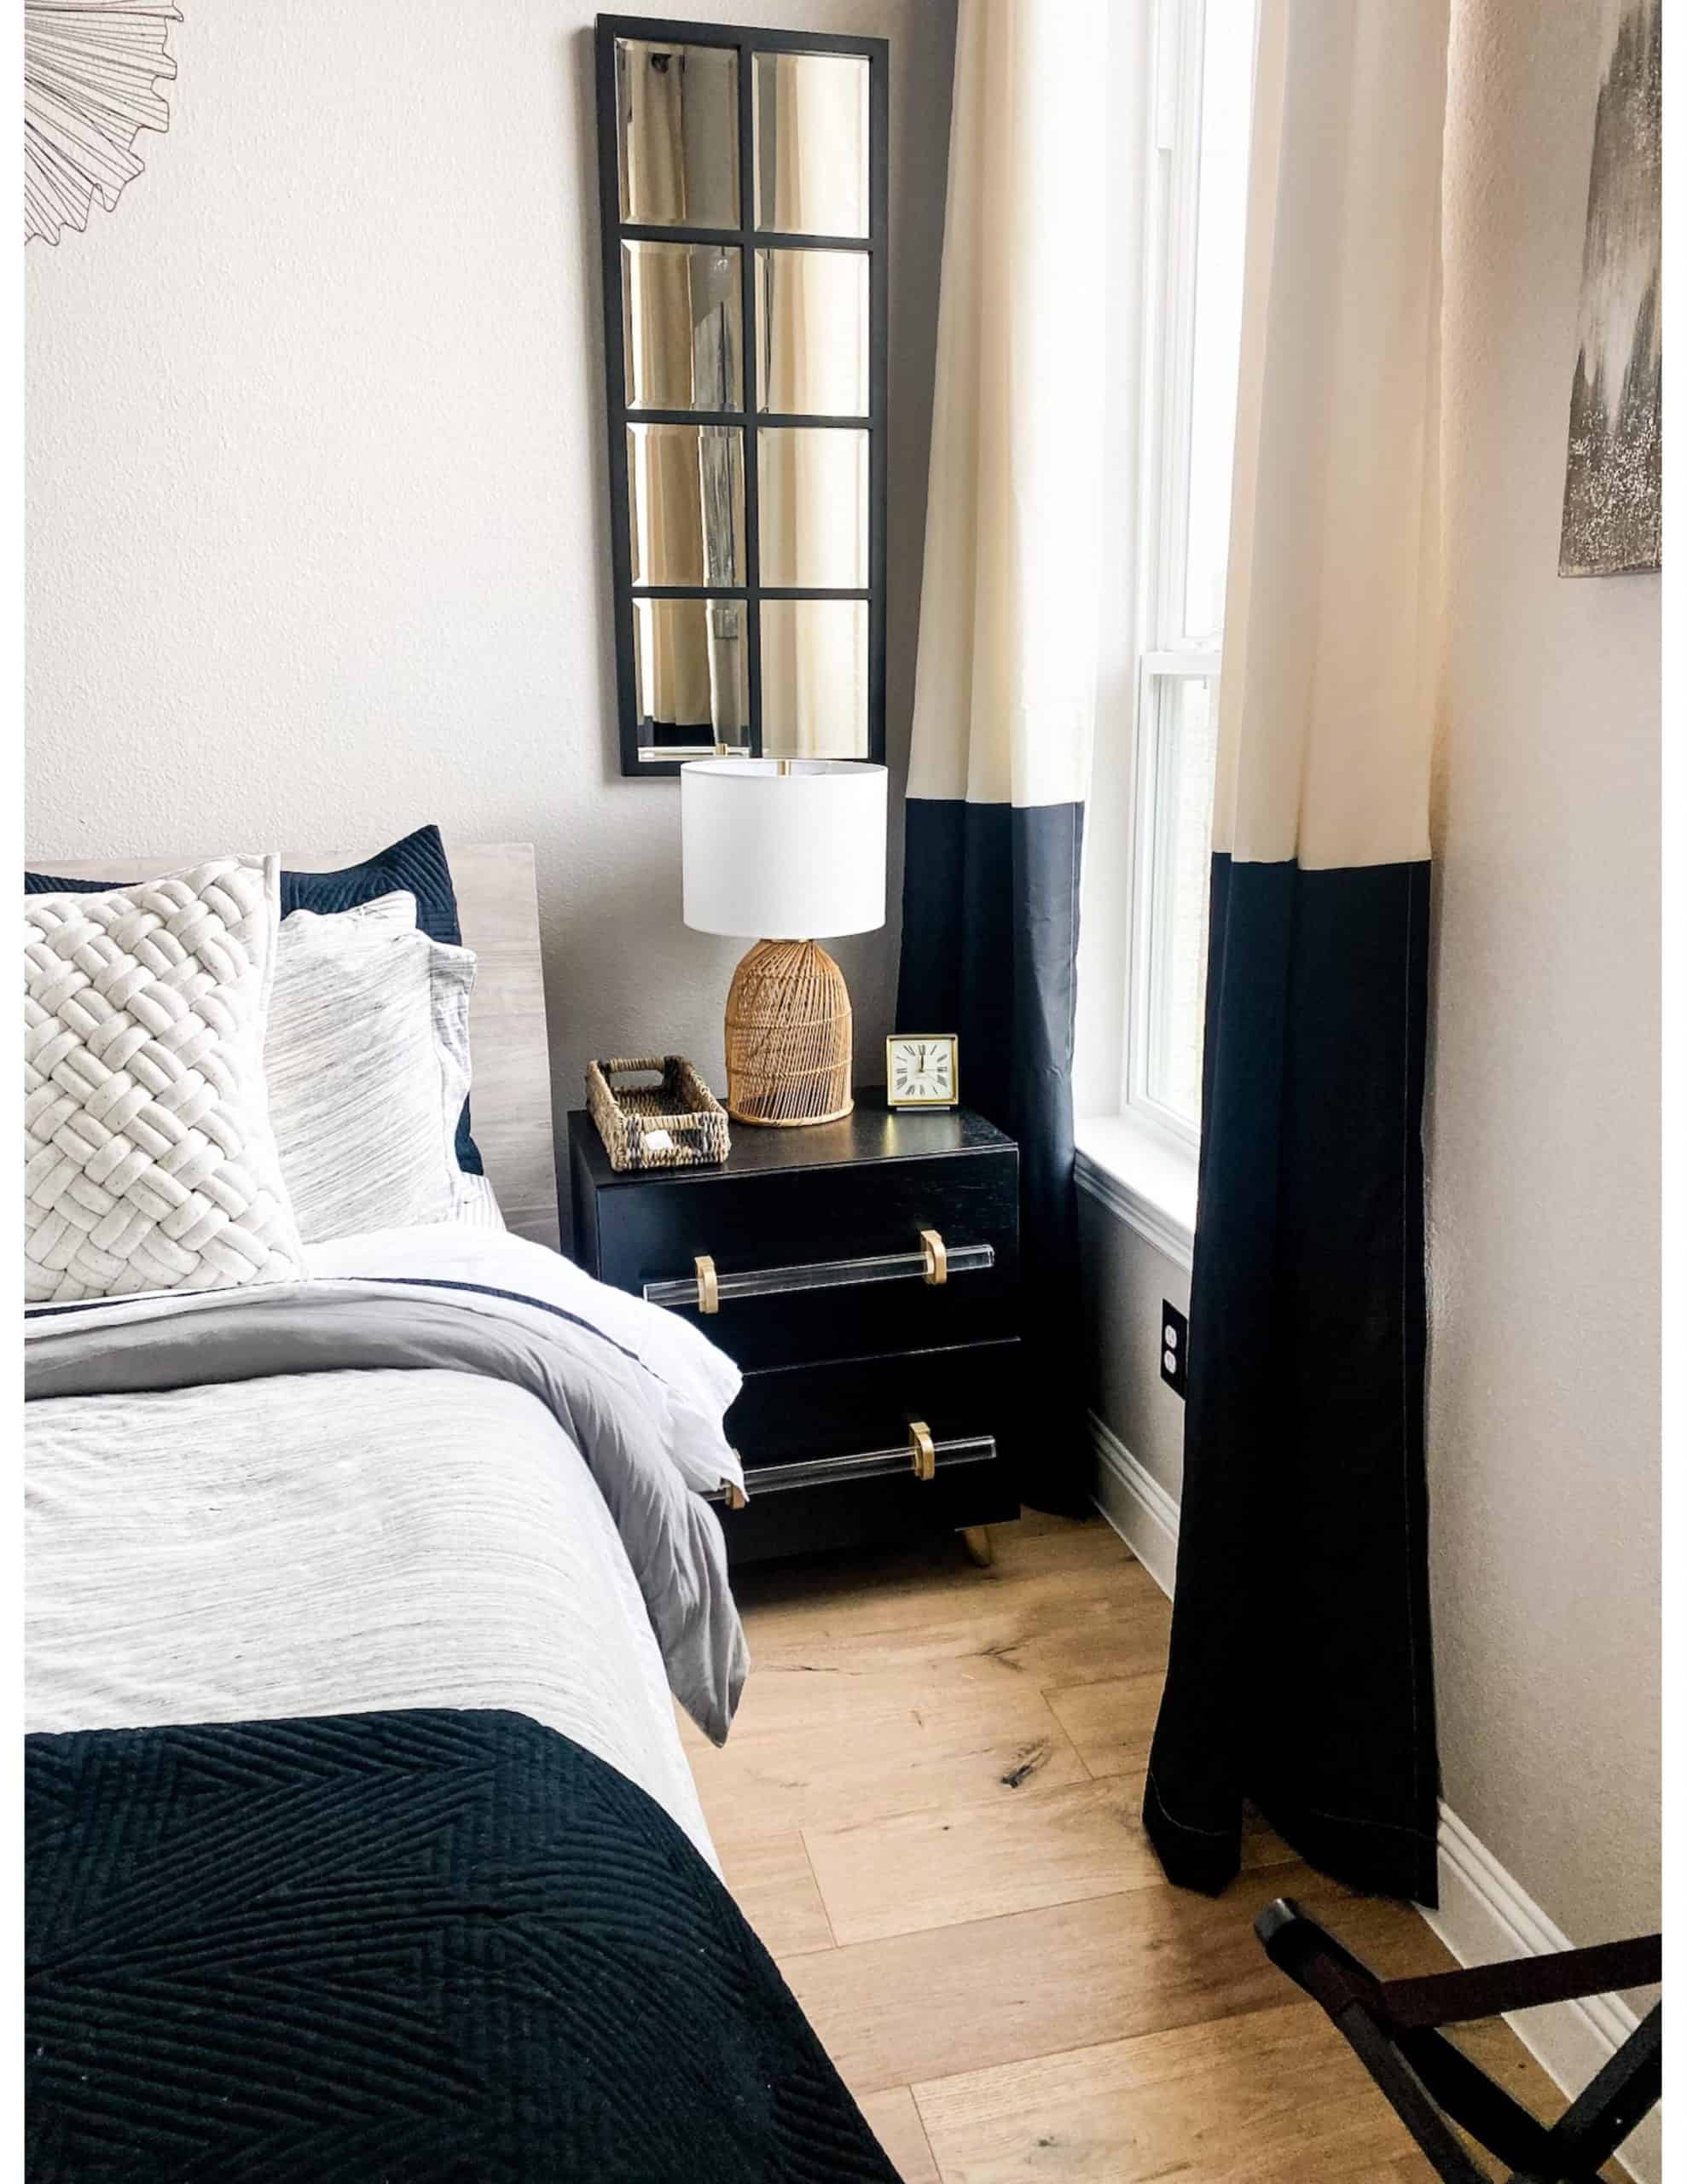 Modern Guest Bedroom by popular Dallas life and style blog, Glamorous Versatility: image of a guest bedroom decorated with black dressers, black and white striped bench, queen size bed with black white, and blue bedding, black and white drapes, modern brass and glass light fixture, woven cream area rug, wicker lamps, and black frame mirrors. 